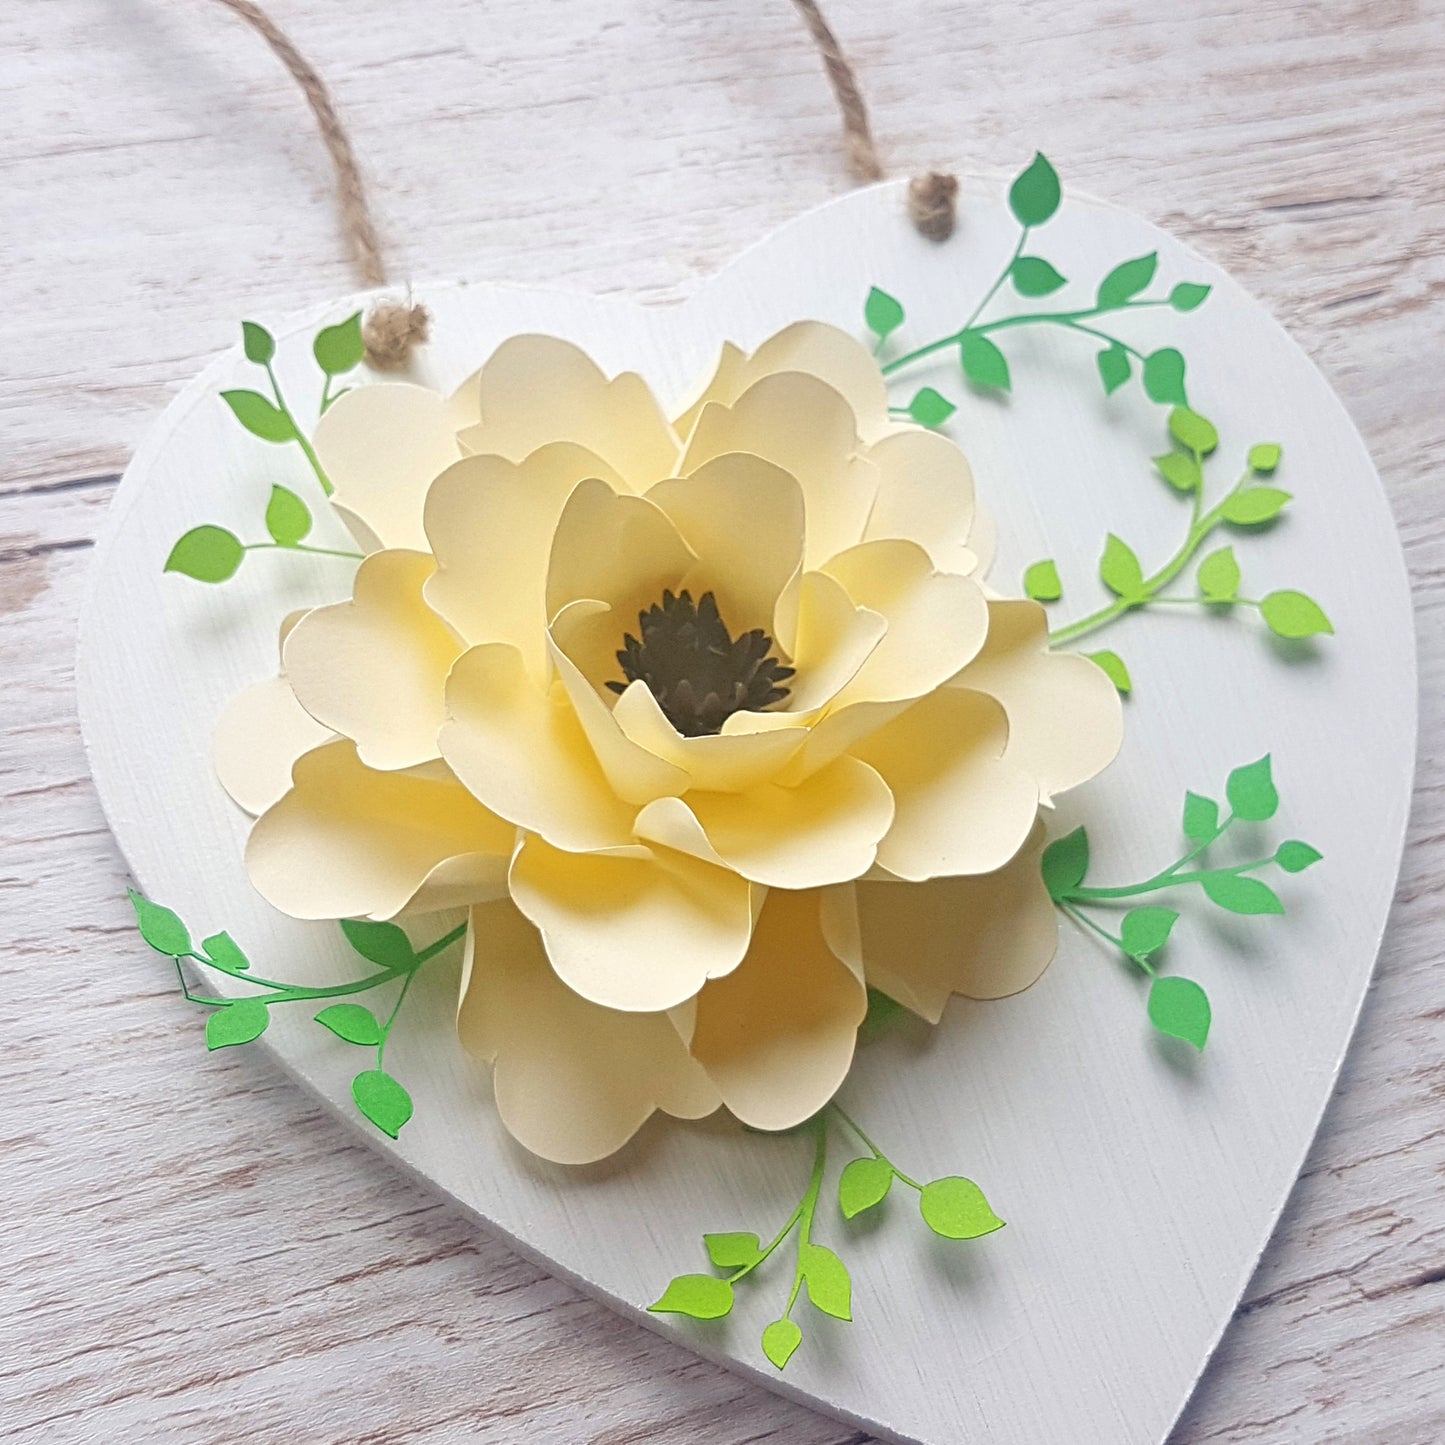 Floral Wooden Heart